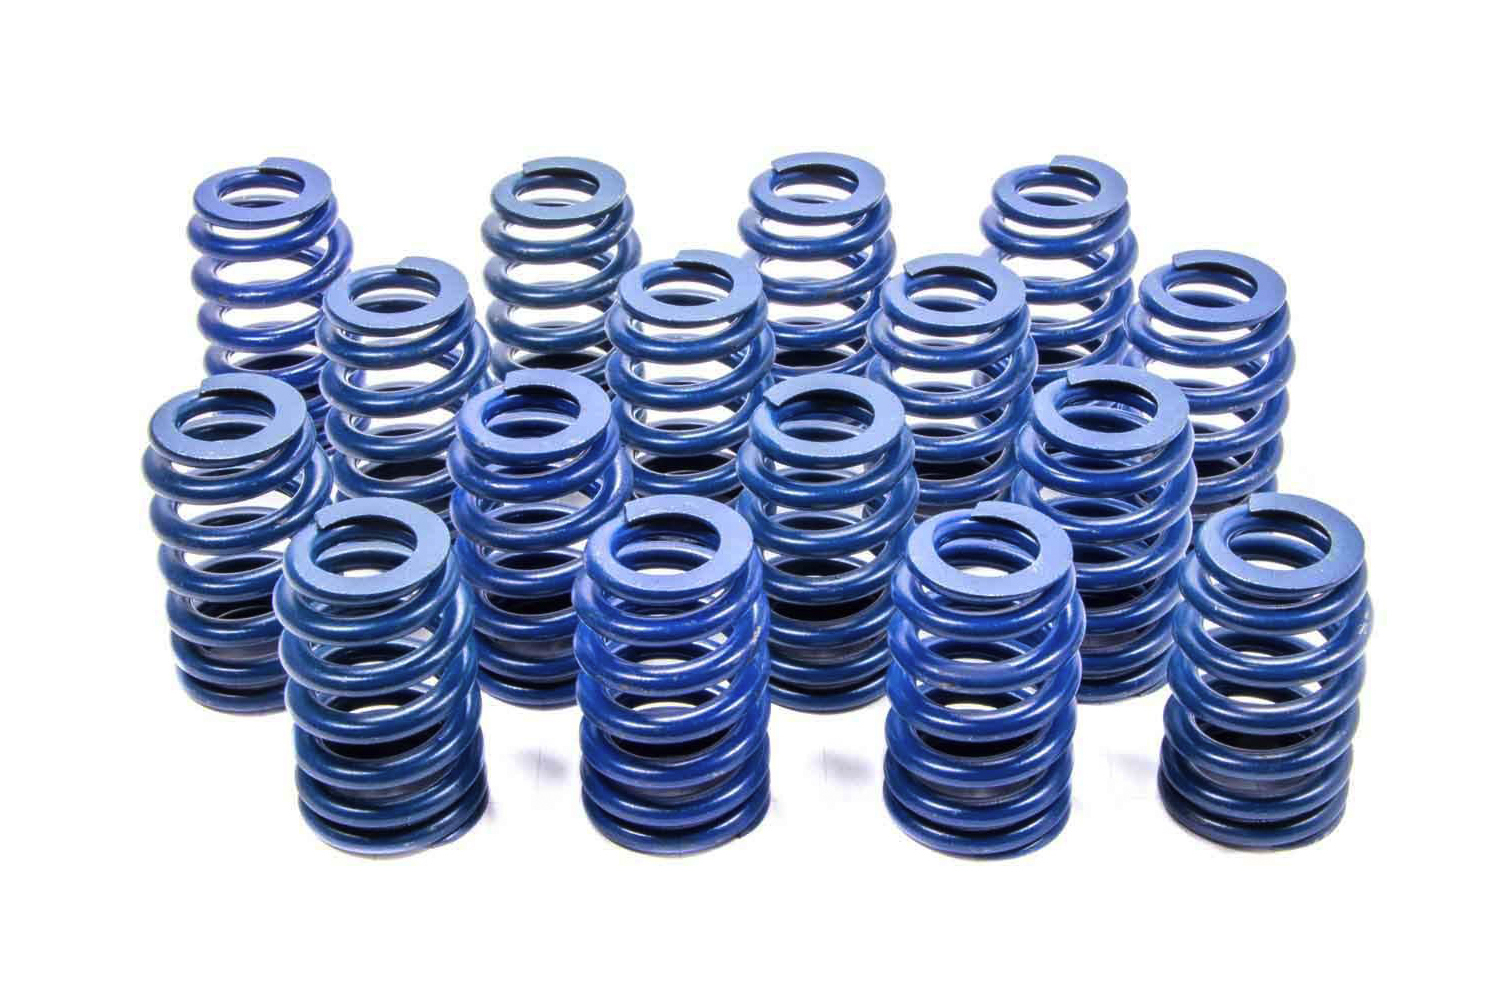 10212811 GM Parts 1.250 Valve Spring for Small Block Chevy 602 Crate Engine 